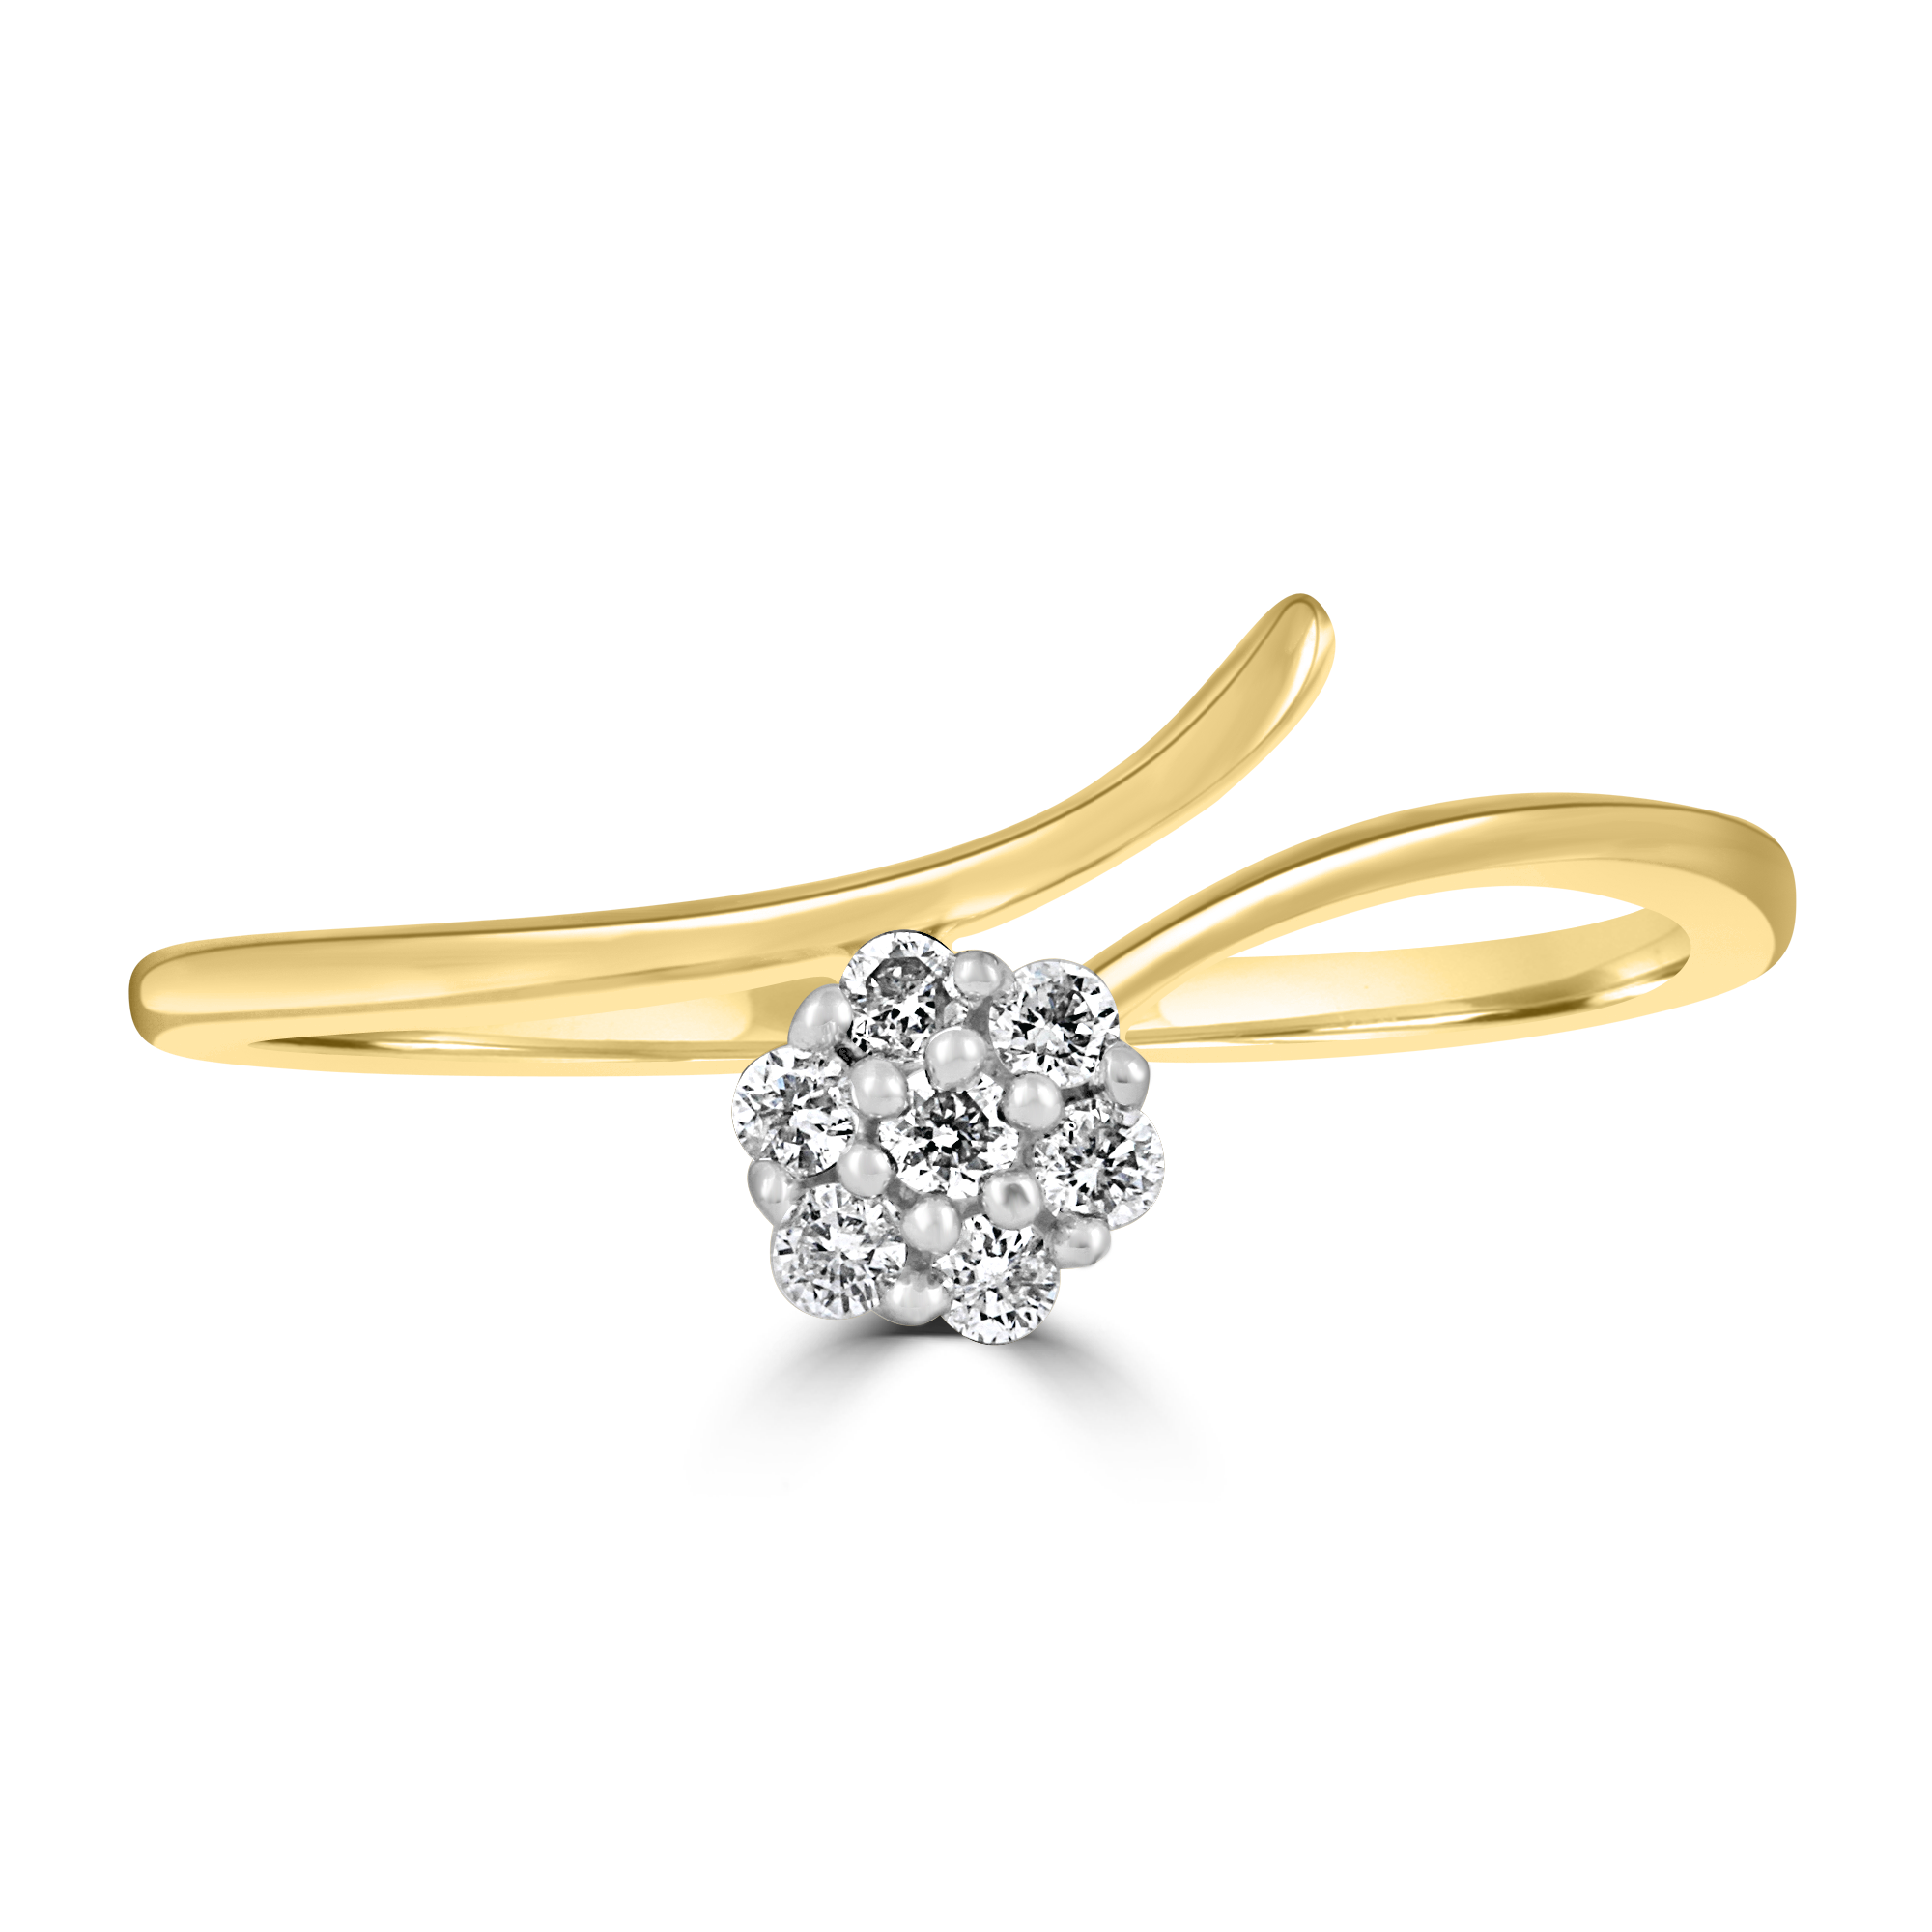 Gold Ring PNG Image HD